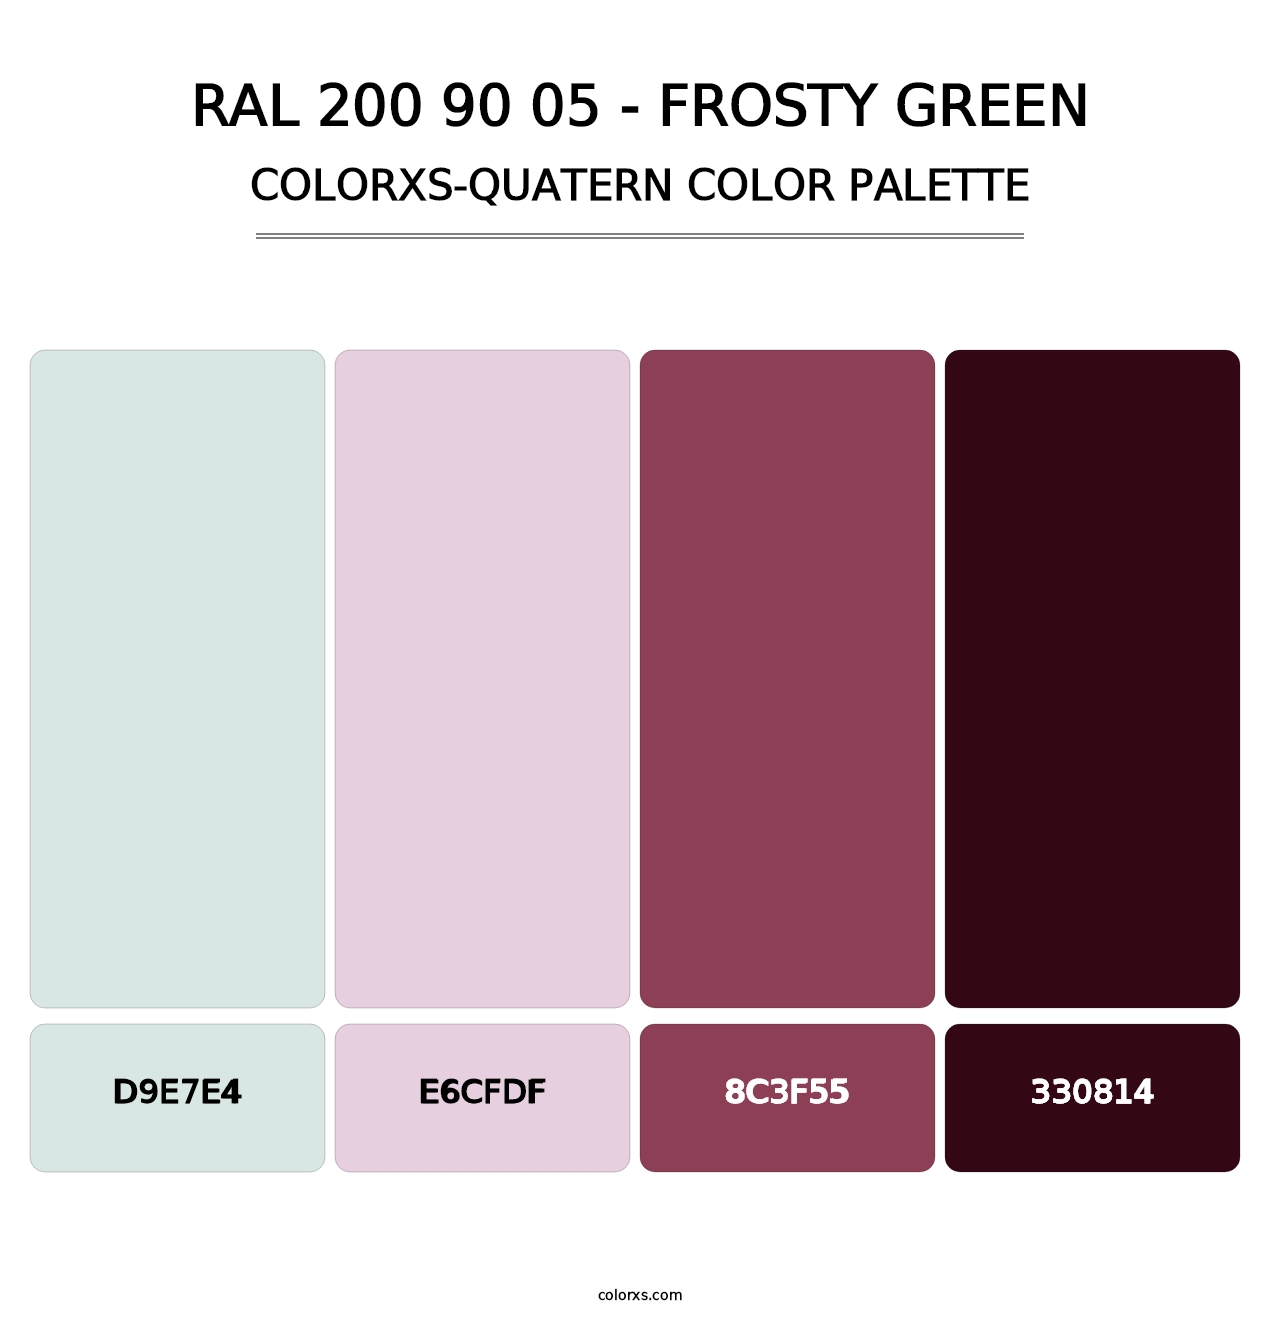 RAL 200 90 05 - Frosty Green - Colorxs Quatern Palette